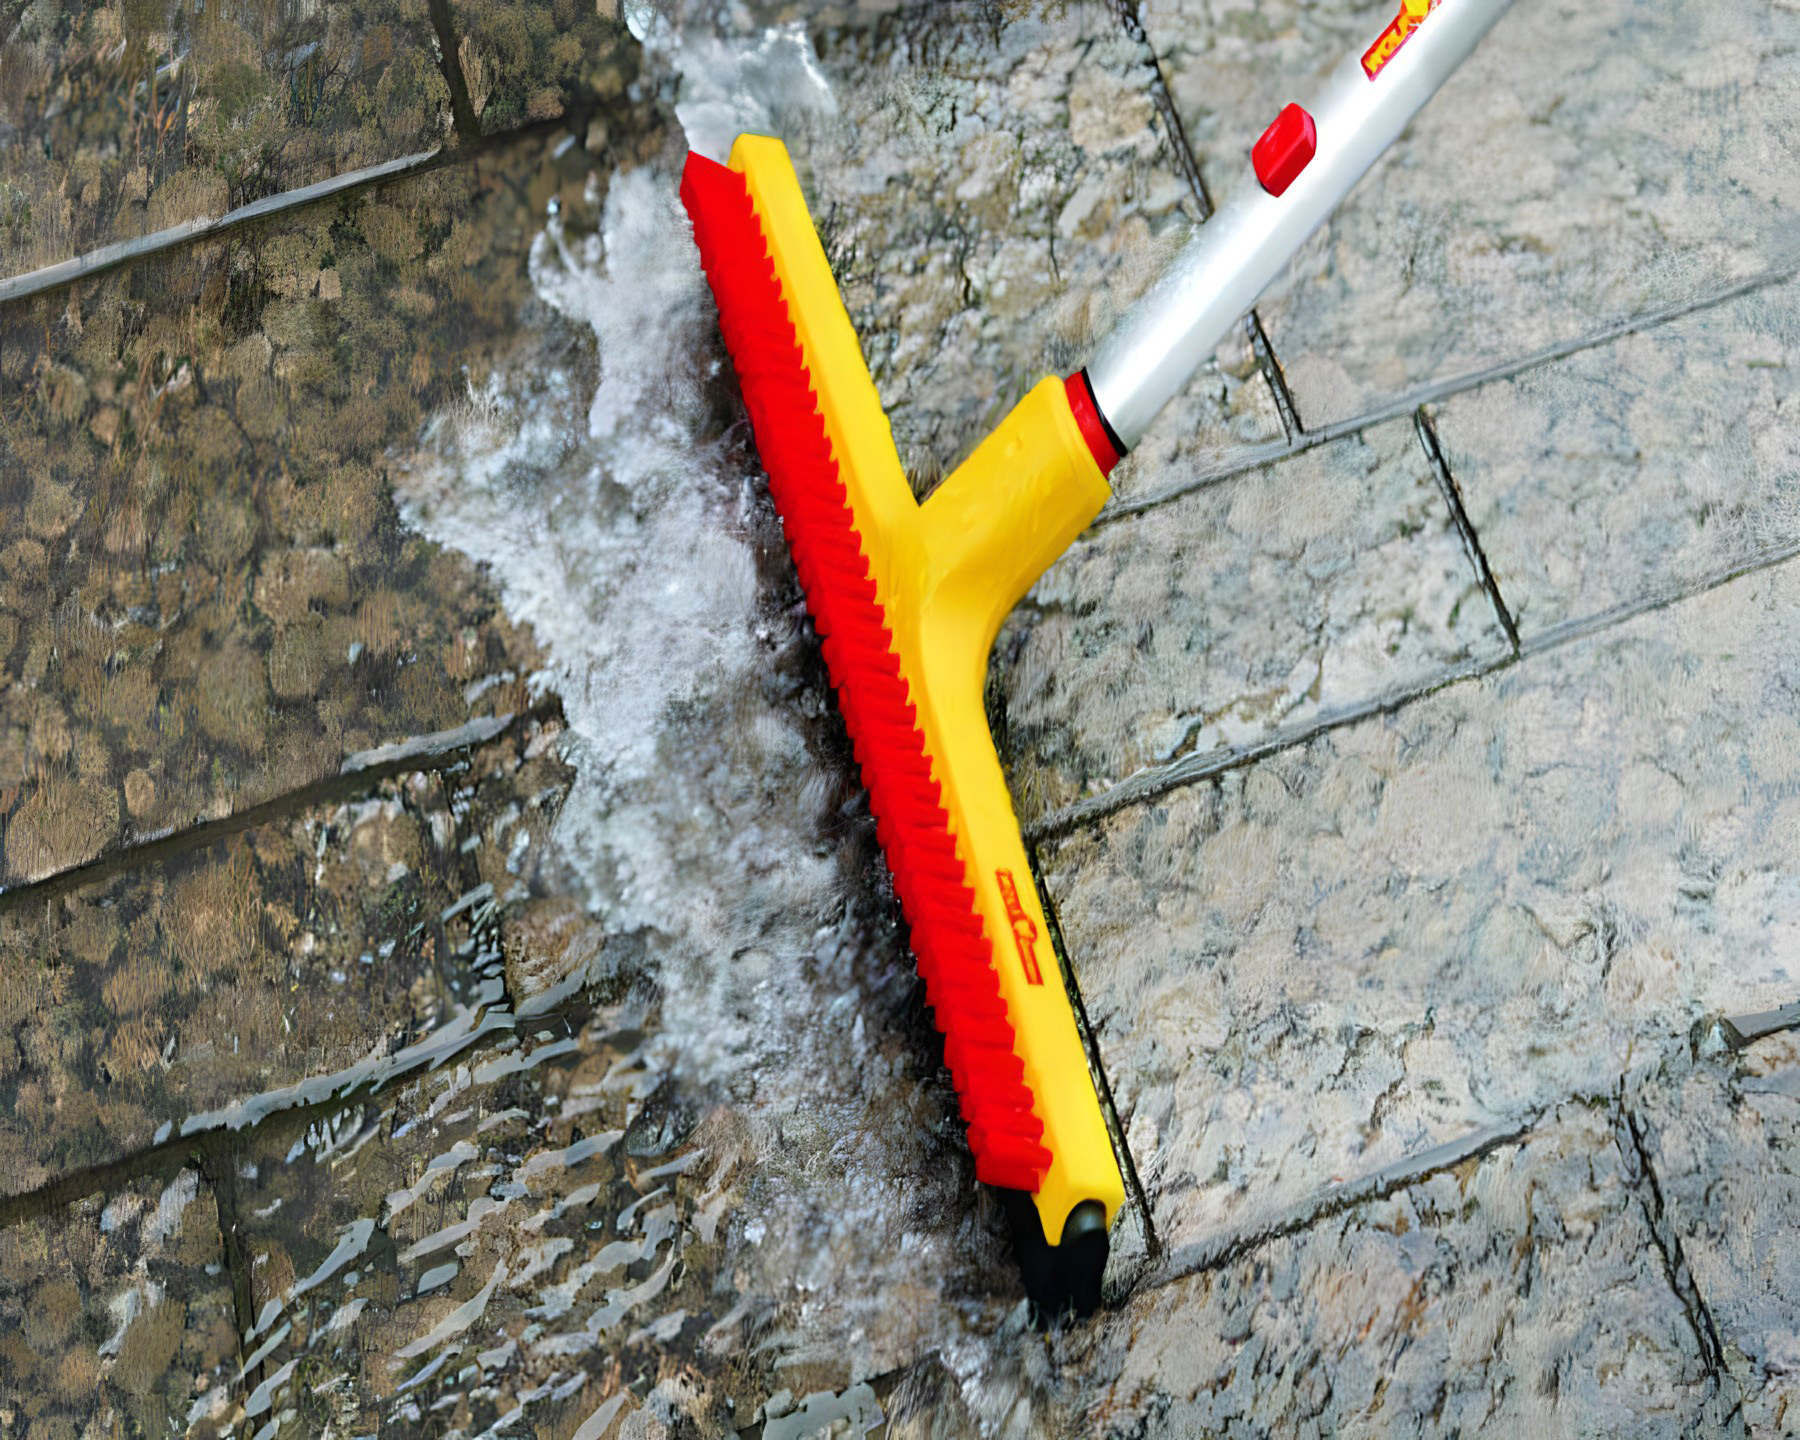 Multichange Floor Squeegee & Scrubbing Bar (FS450M) - Wolf (Replaces the BW45M) - Please note the replacement head of FS450M is red not yellow